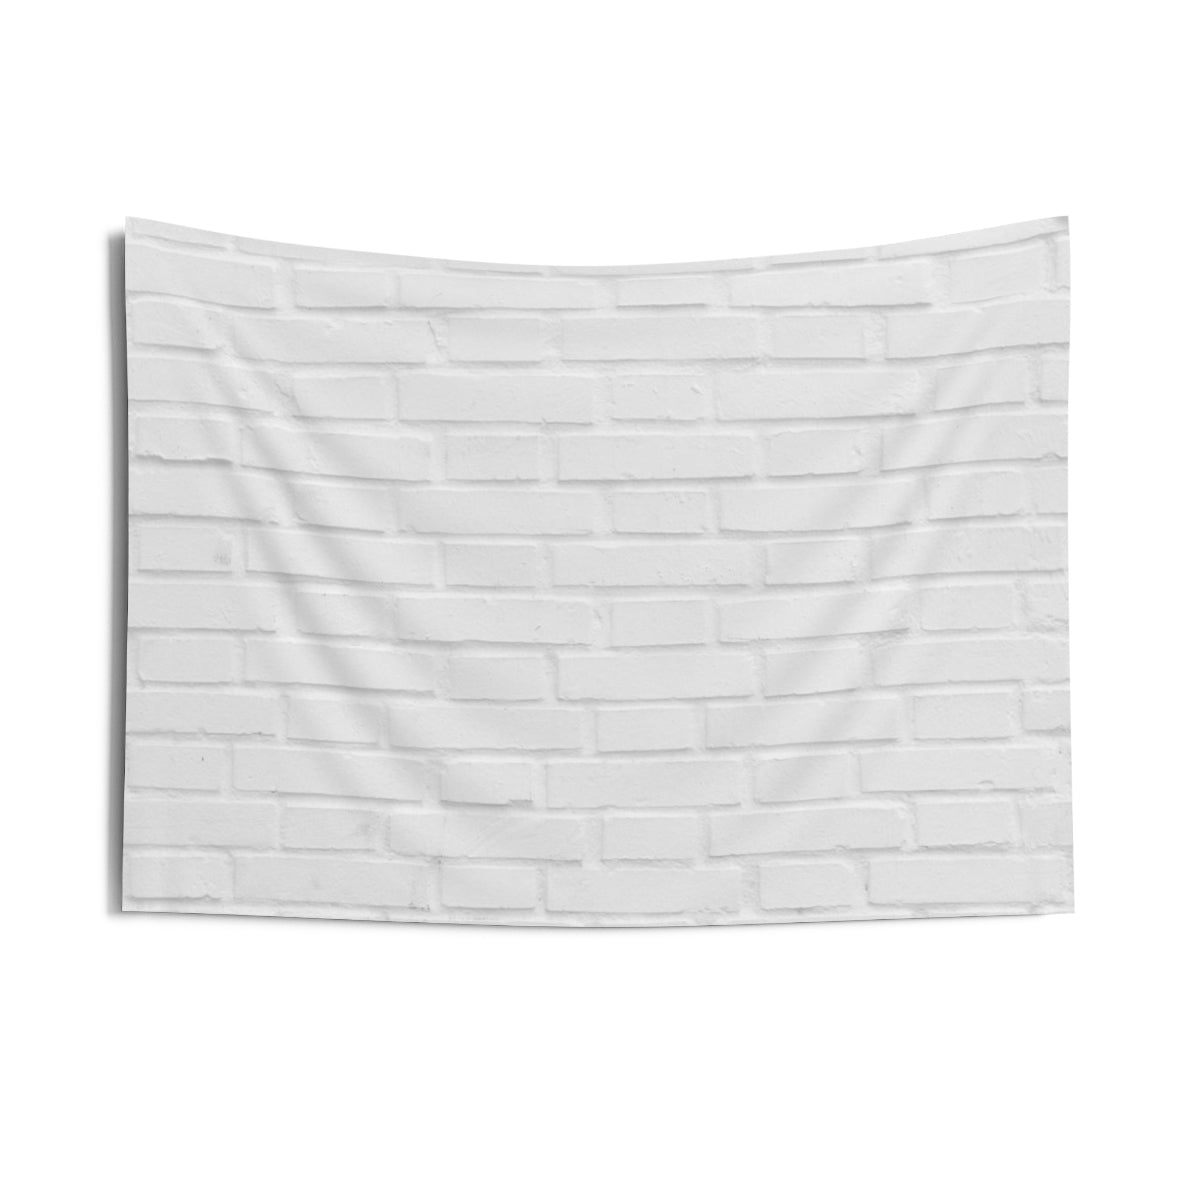 White Brick Wall Tapestry, Indoor Wall Tapestries Photo Backdrops Landscape Indoor Wall Art Hanging Tapestries Décor Home Dorm Room Gift Starcove Fashion